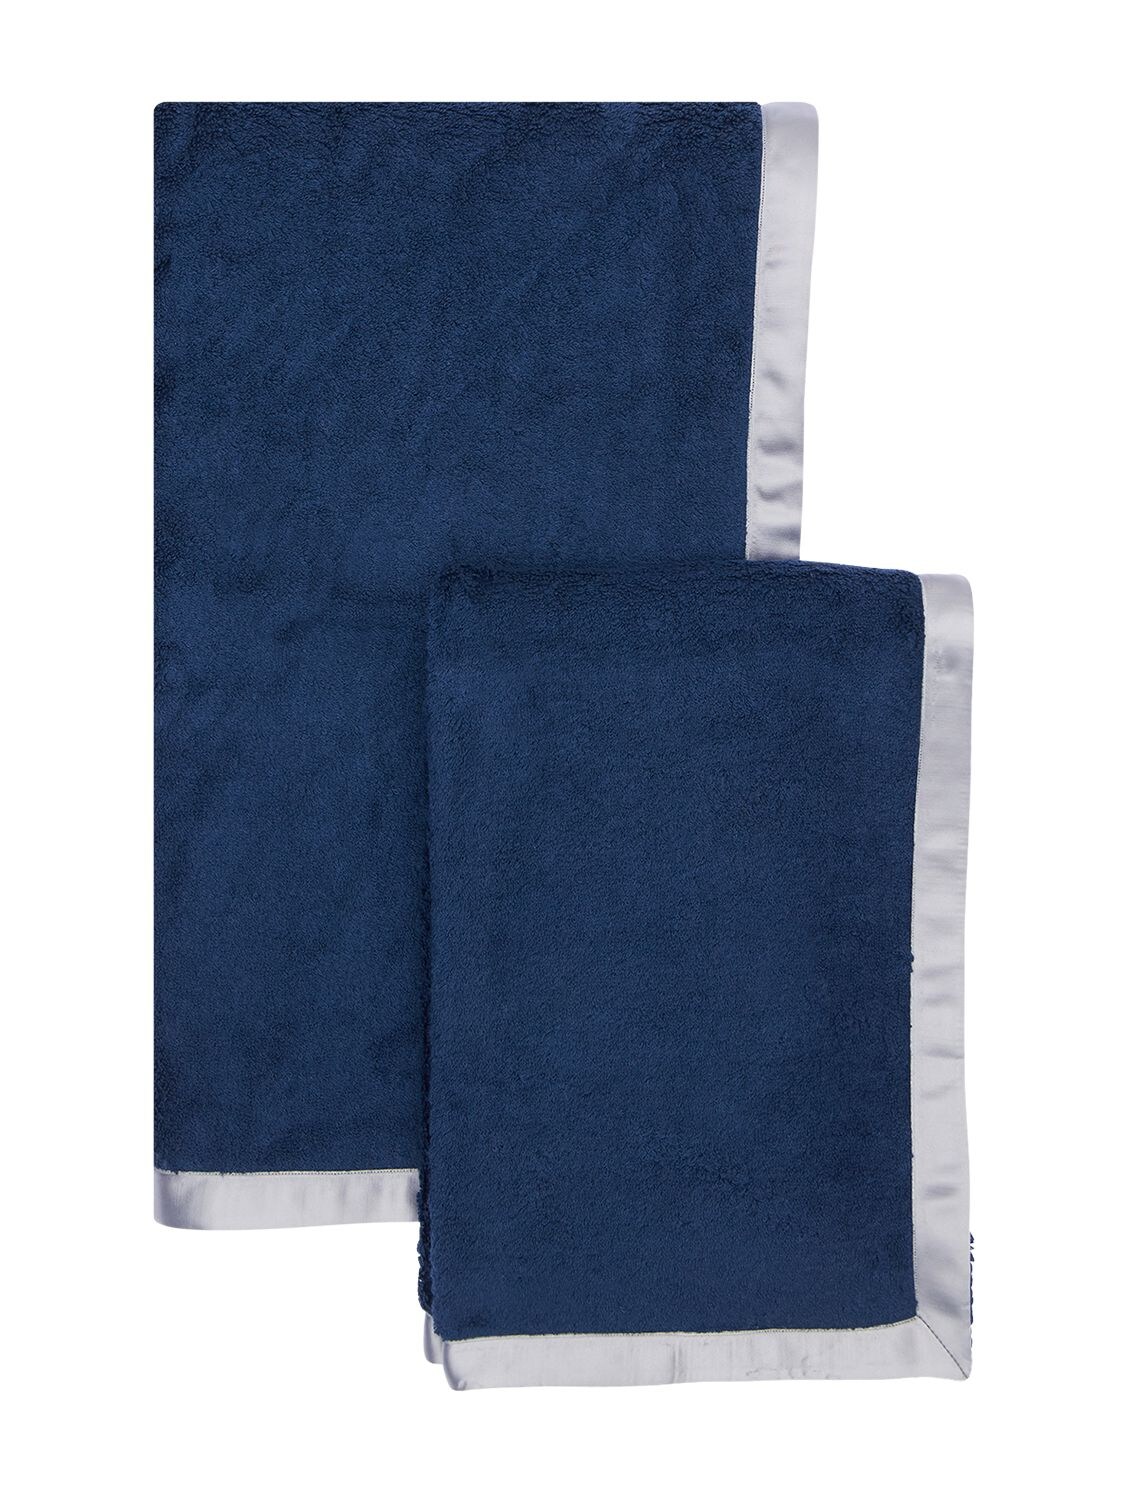 Alessandro Di Marco Set Of 2 Cotton Terrycloth Towels In Blue,grey